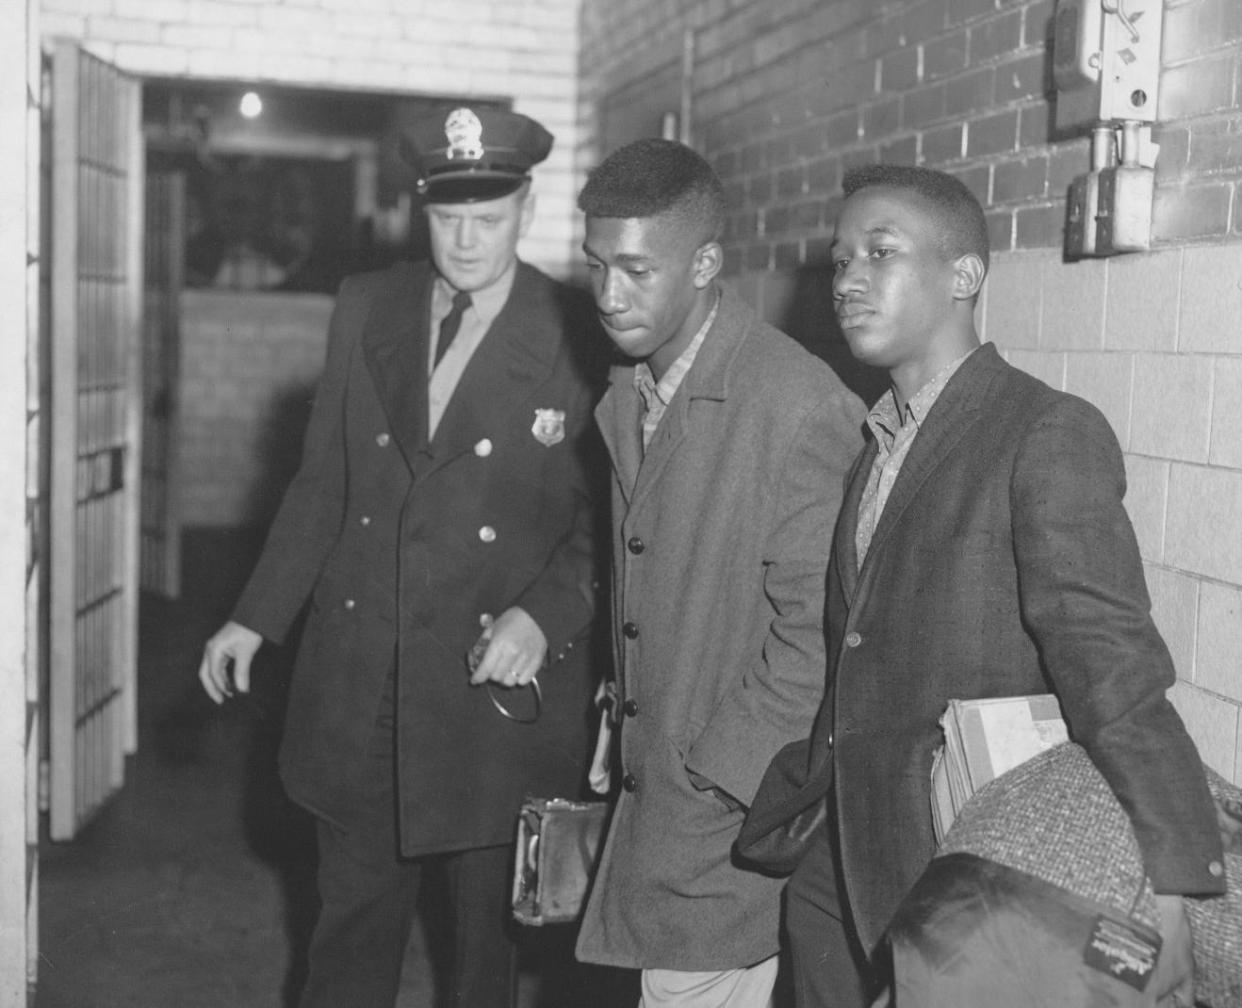 During the Library Demonstration on March 16, 1960, Sterling High students Robert Anderson and Benjamin Downs were arrested.